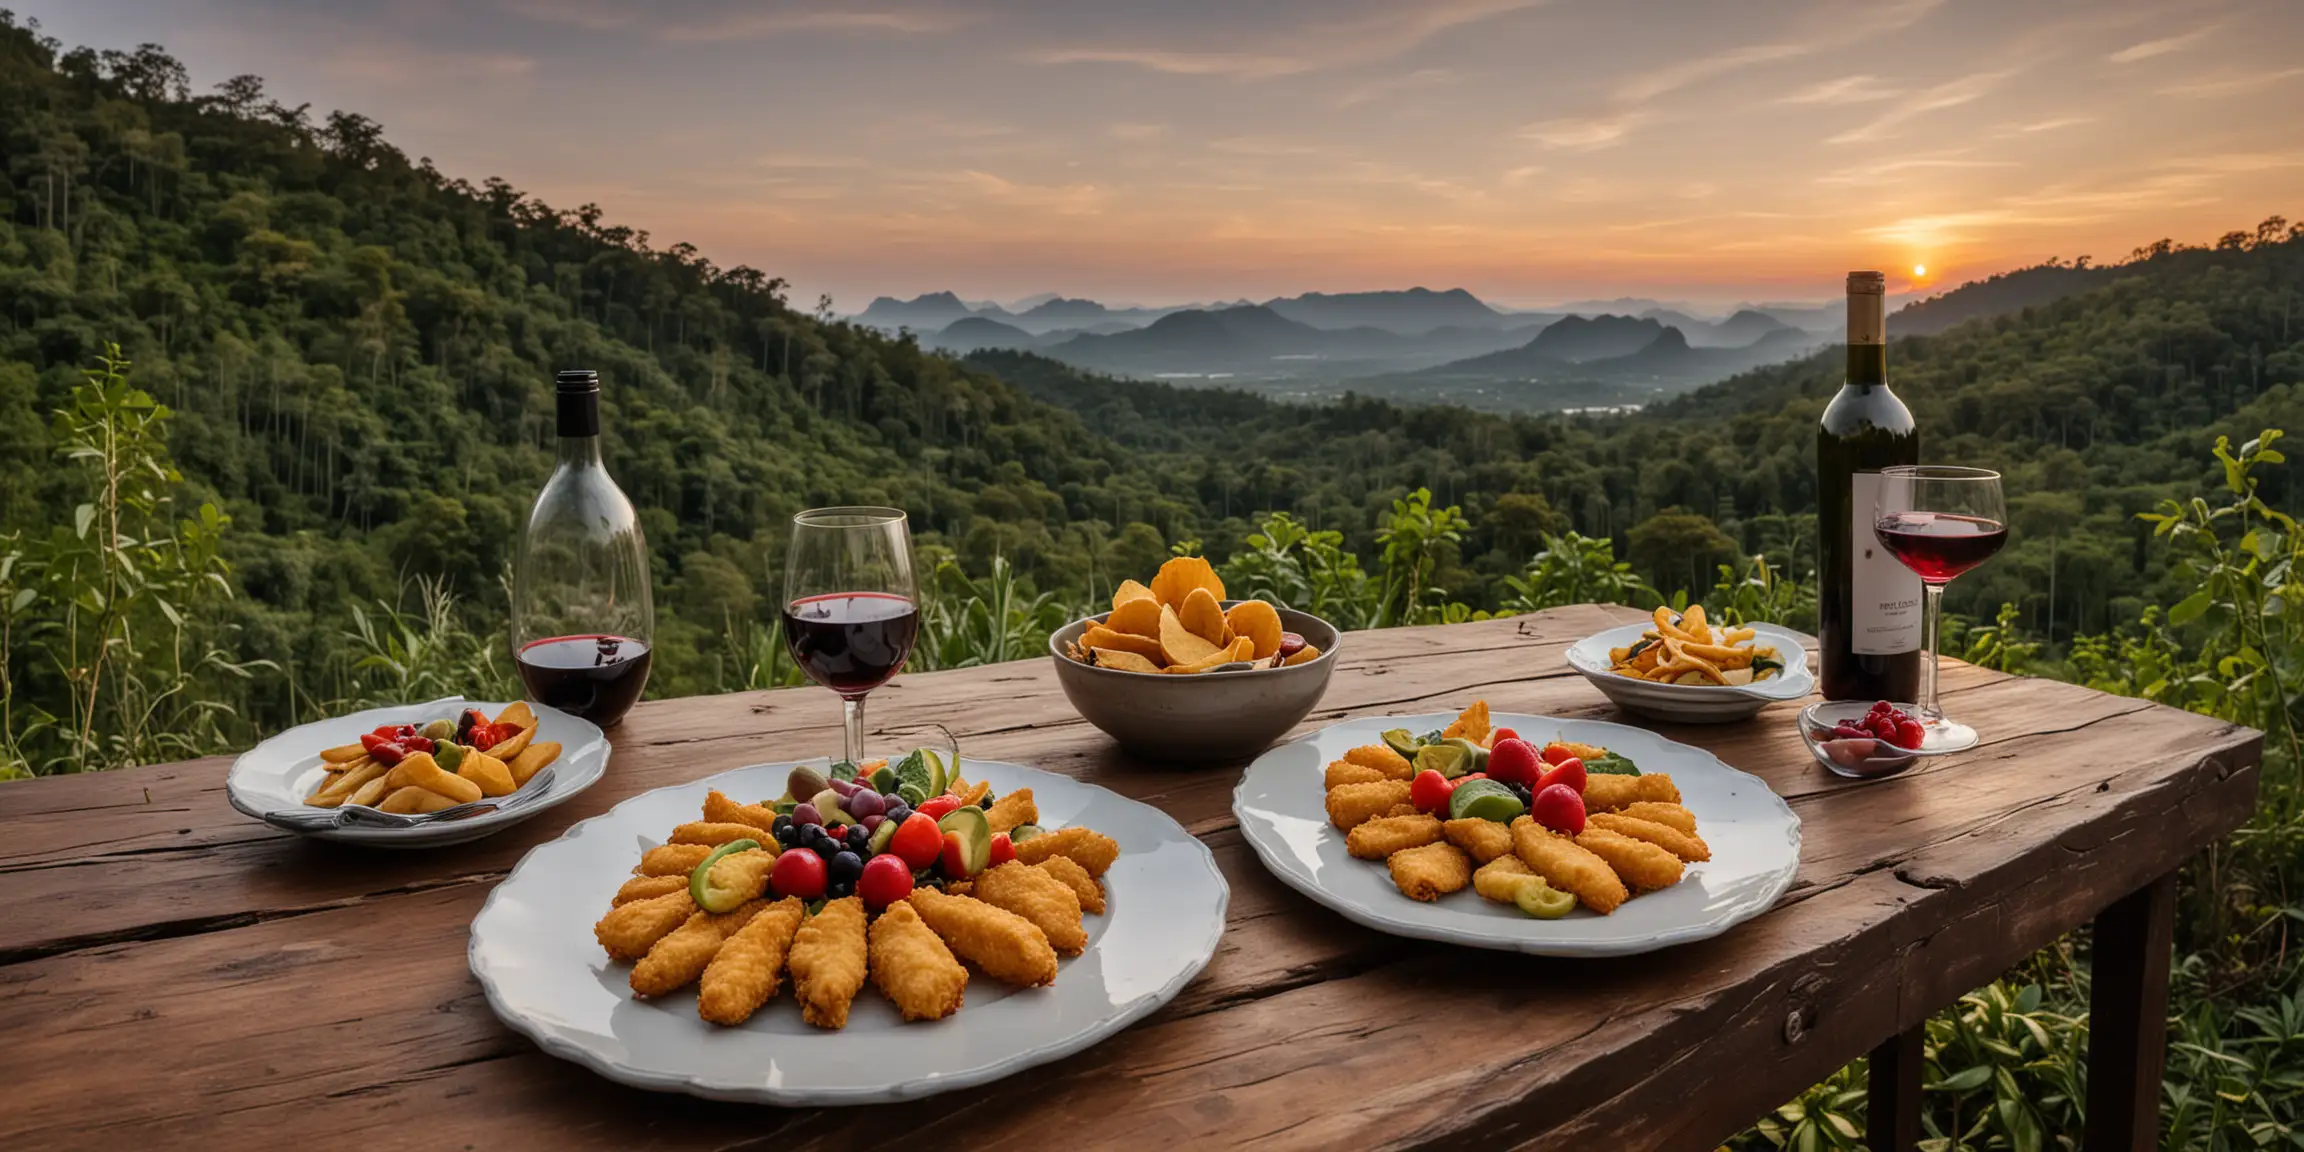 A wide-angle photograph taken with a Canon EOS R5, capturing Beautifully arranged table Scenery amidst nature of forests and mountains Northern part of Thailand during the golden hour. On the table, there are two plates: one with crispy pescadito frito and another with a selection of fresh fruits. A glass of red wine complements the scene. In the background, the mountain looks stunning and inviting.  --style raw.